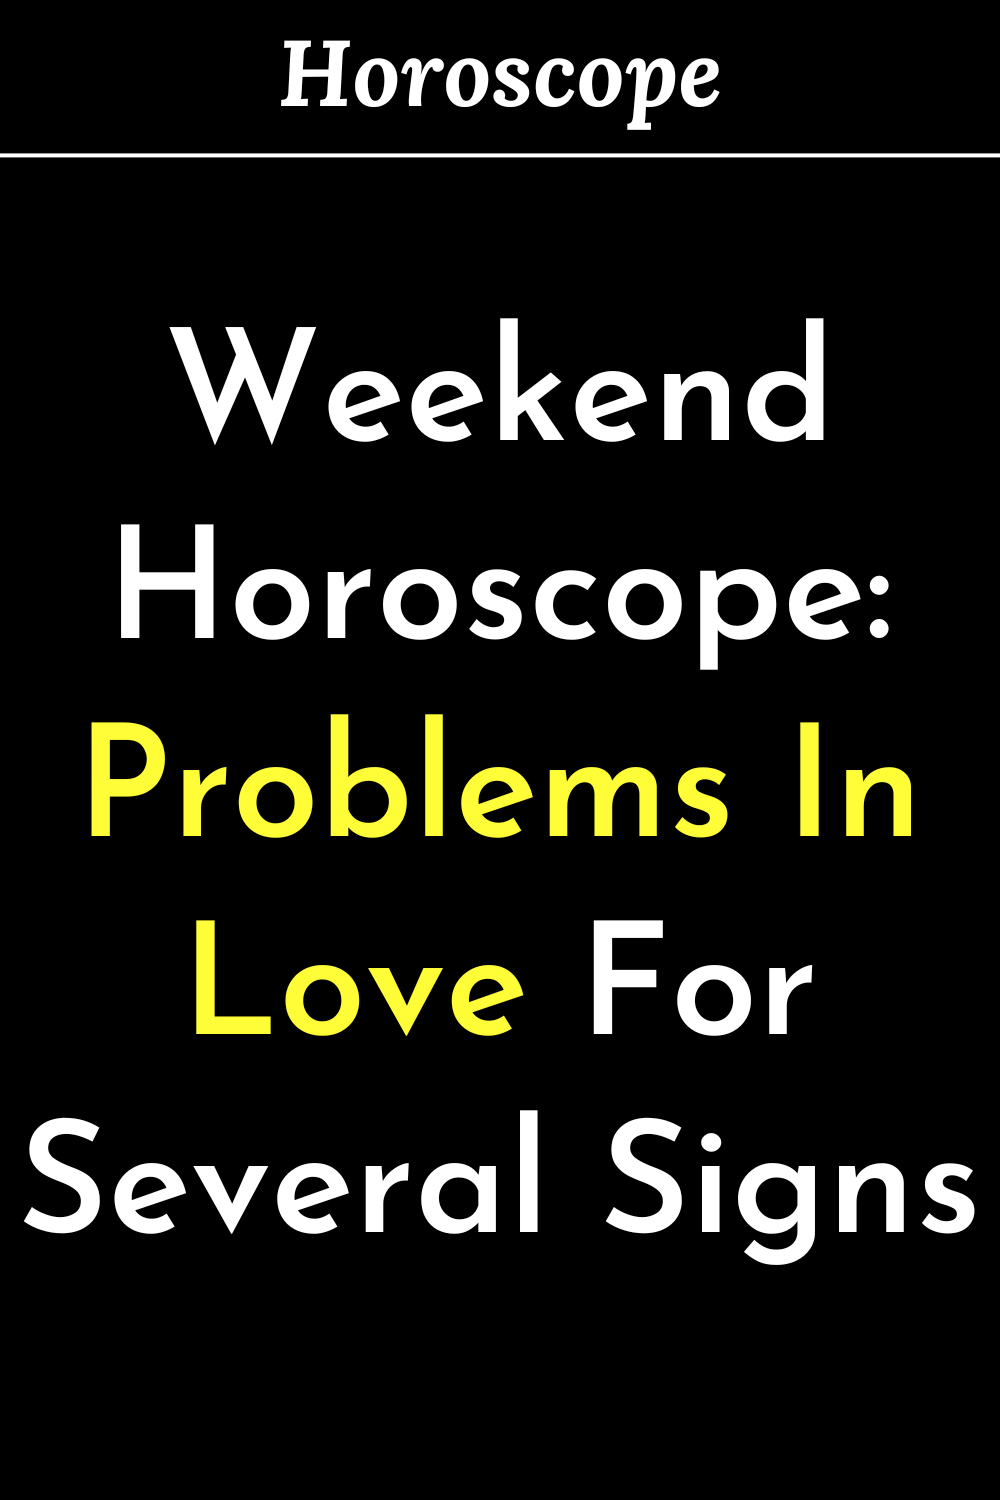 Weekend Horoscope: Problems In Love For Several Signs